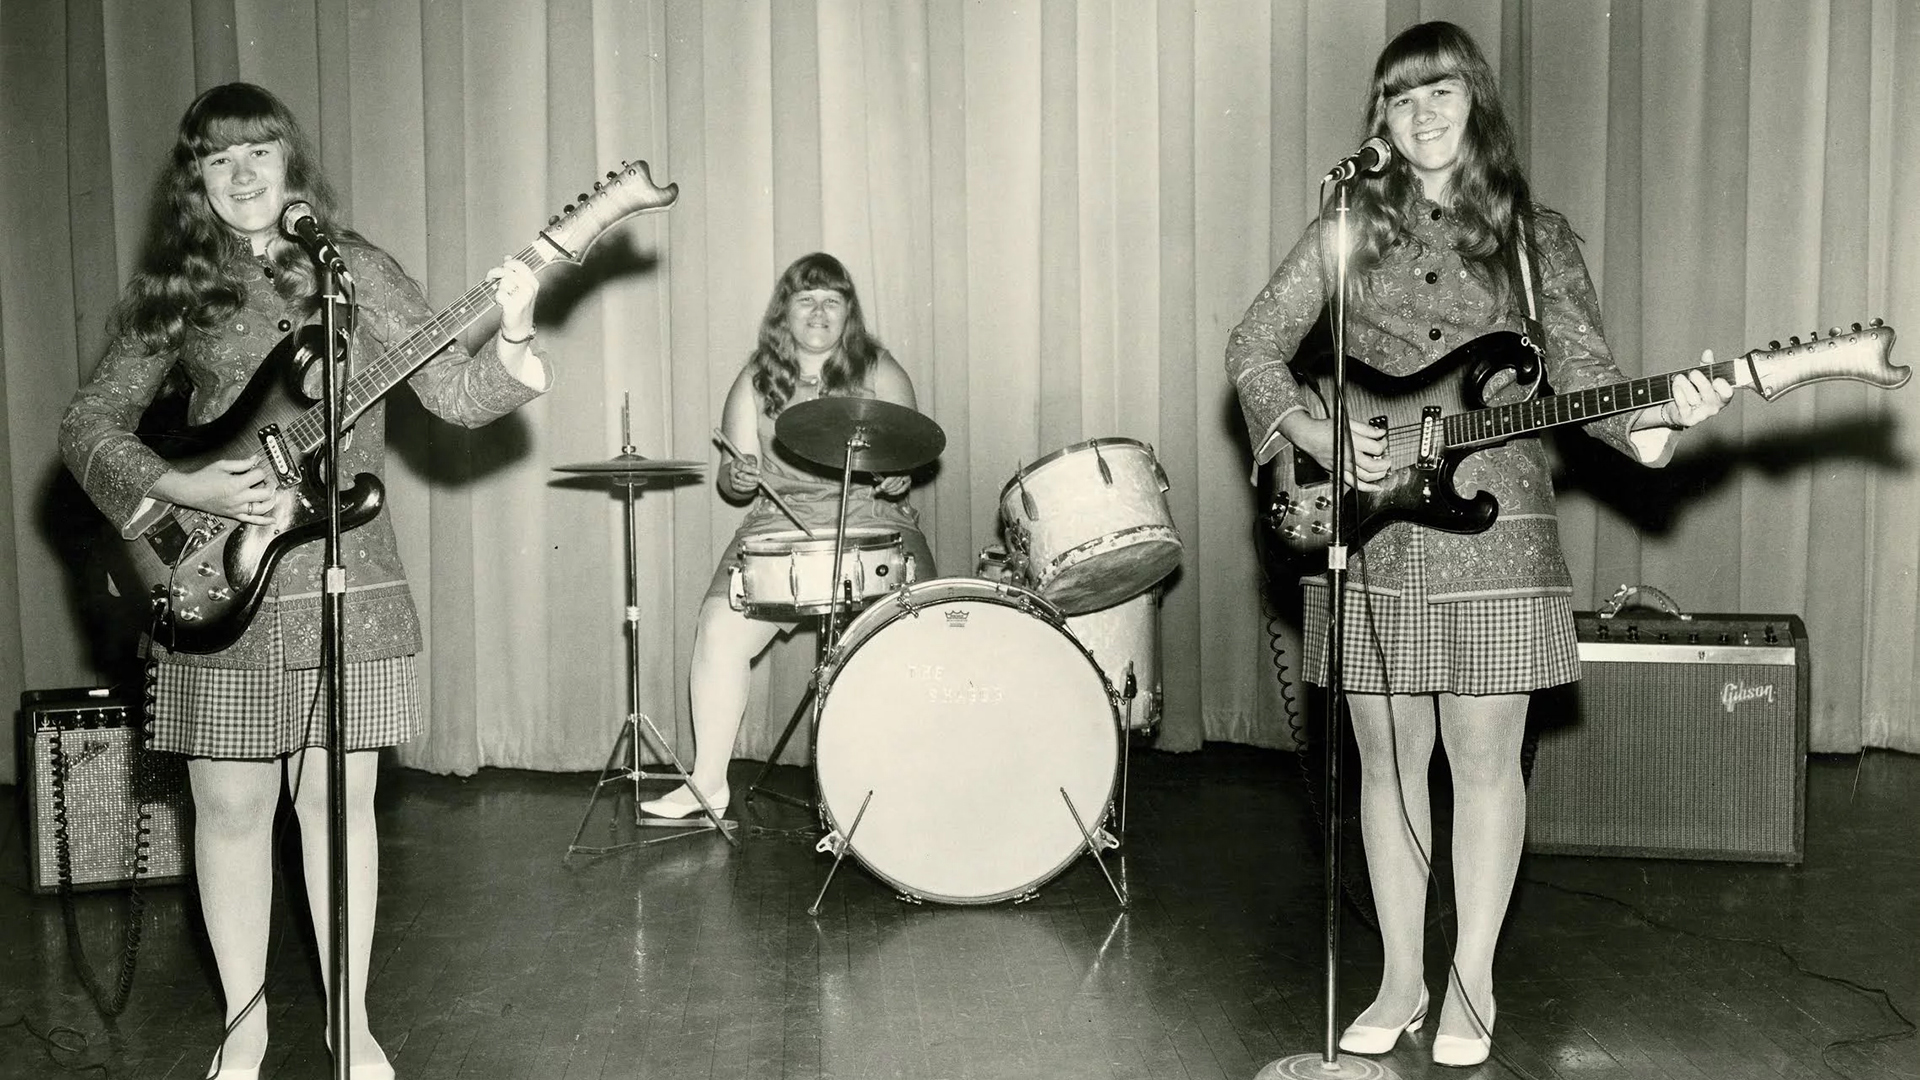 New Hampshire sister act The Shaggs feature in This is What it Sounds Like by Susan Rogers & Ogi Ogas. Photo: Wikipedia